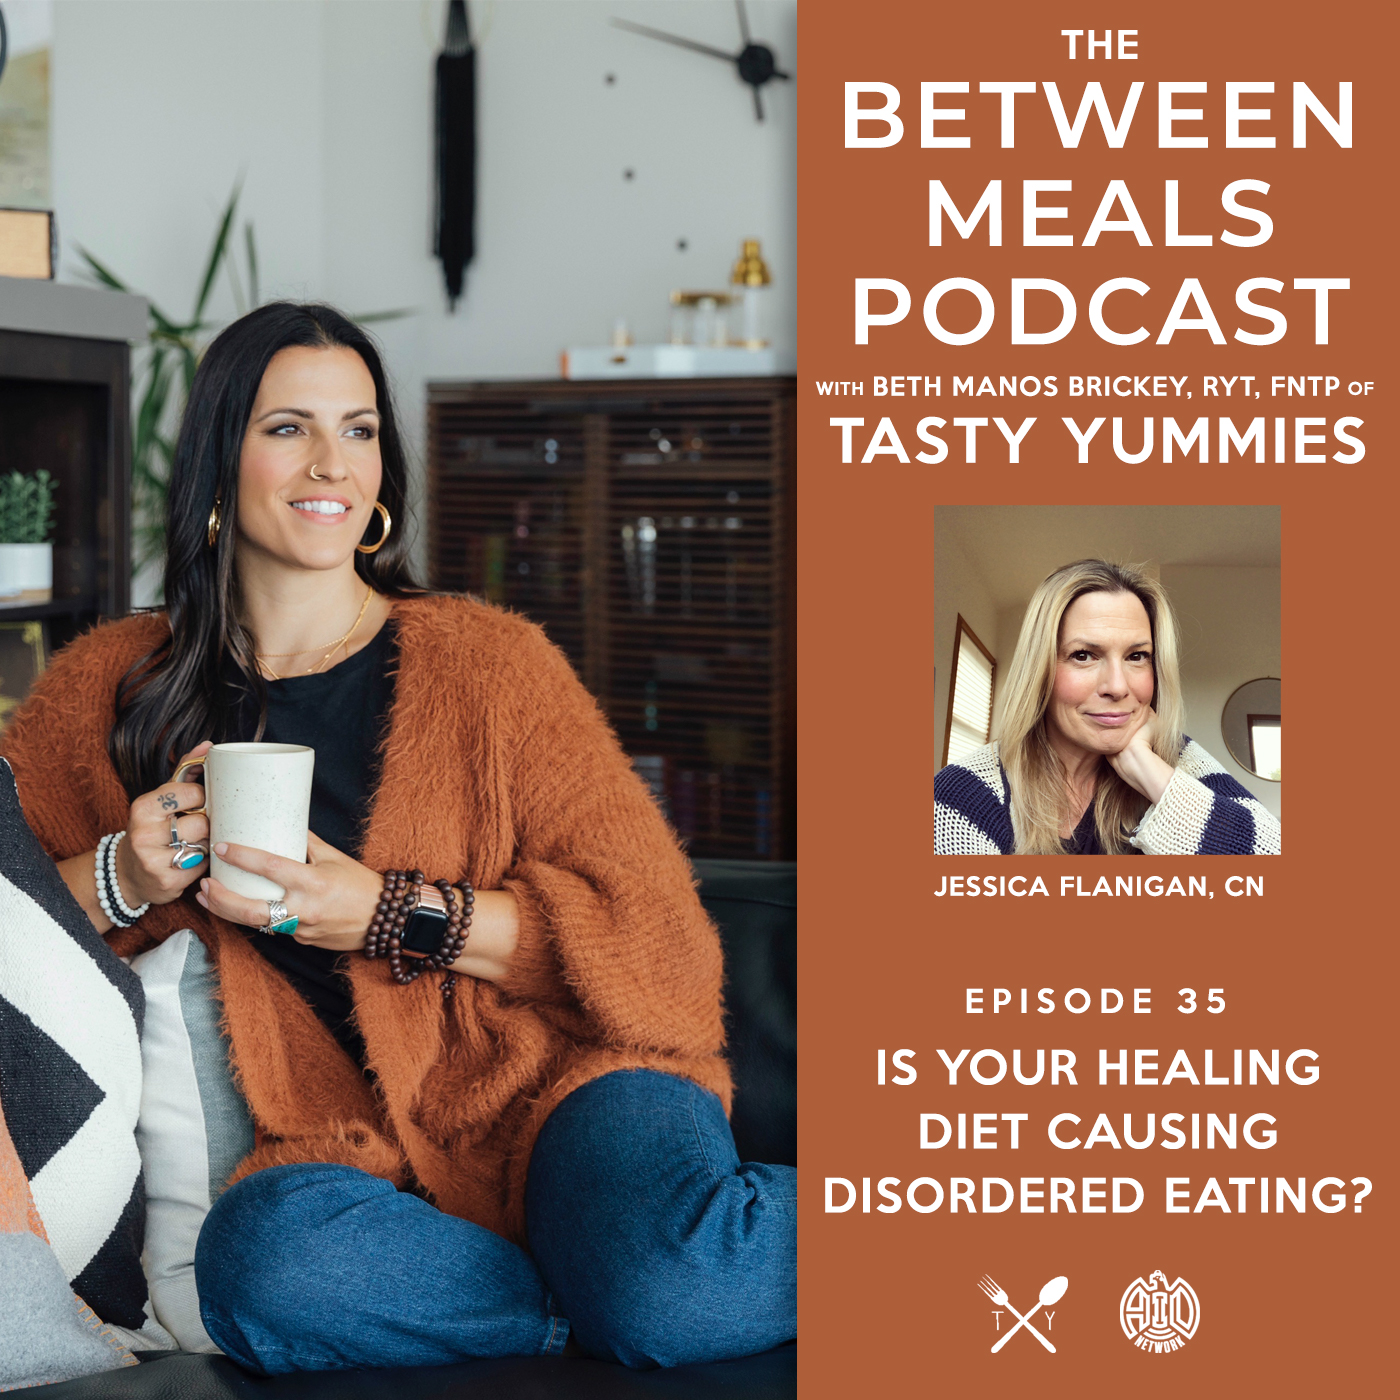 Between Meals Podcast. Episode 35: Is Your Healing Diet Causing Disordered Eating"